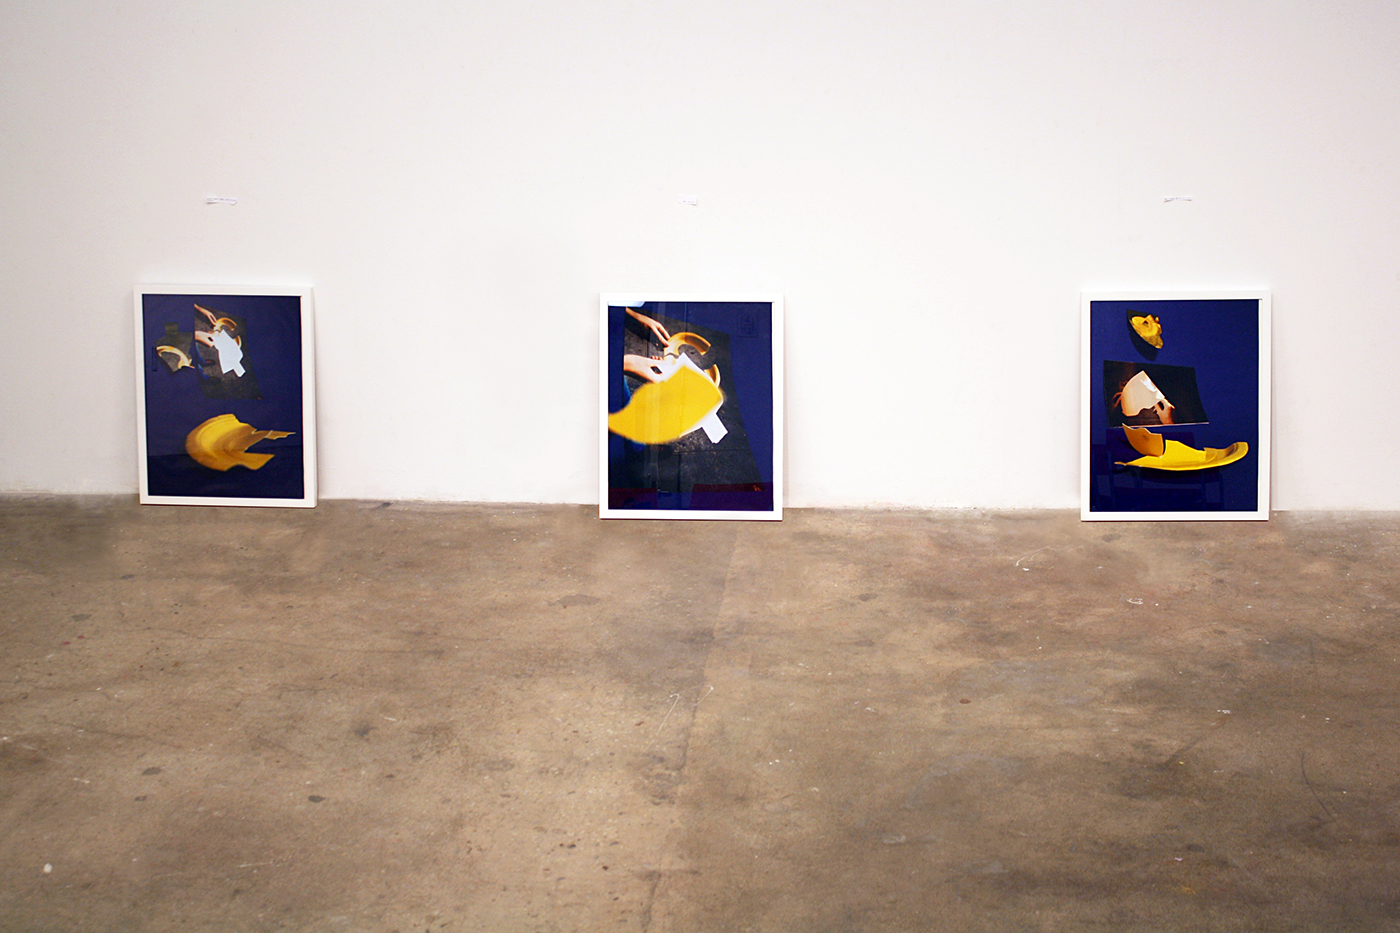 Janna_Dyk-17_Installation_view_Realignment_fig._1-3_2014_photographyinstall